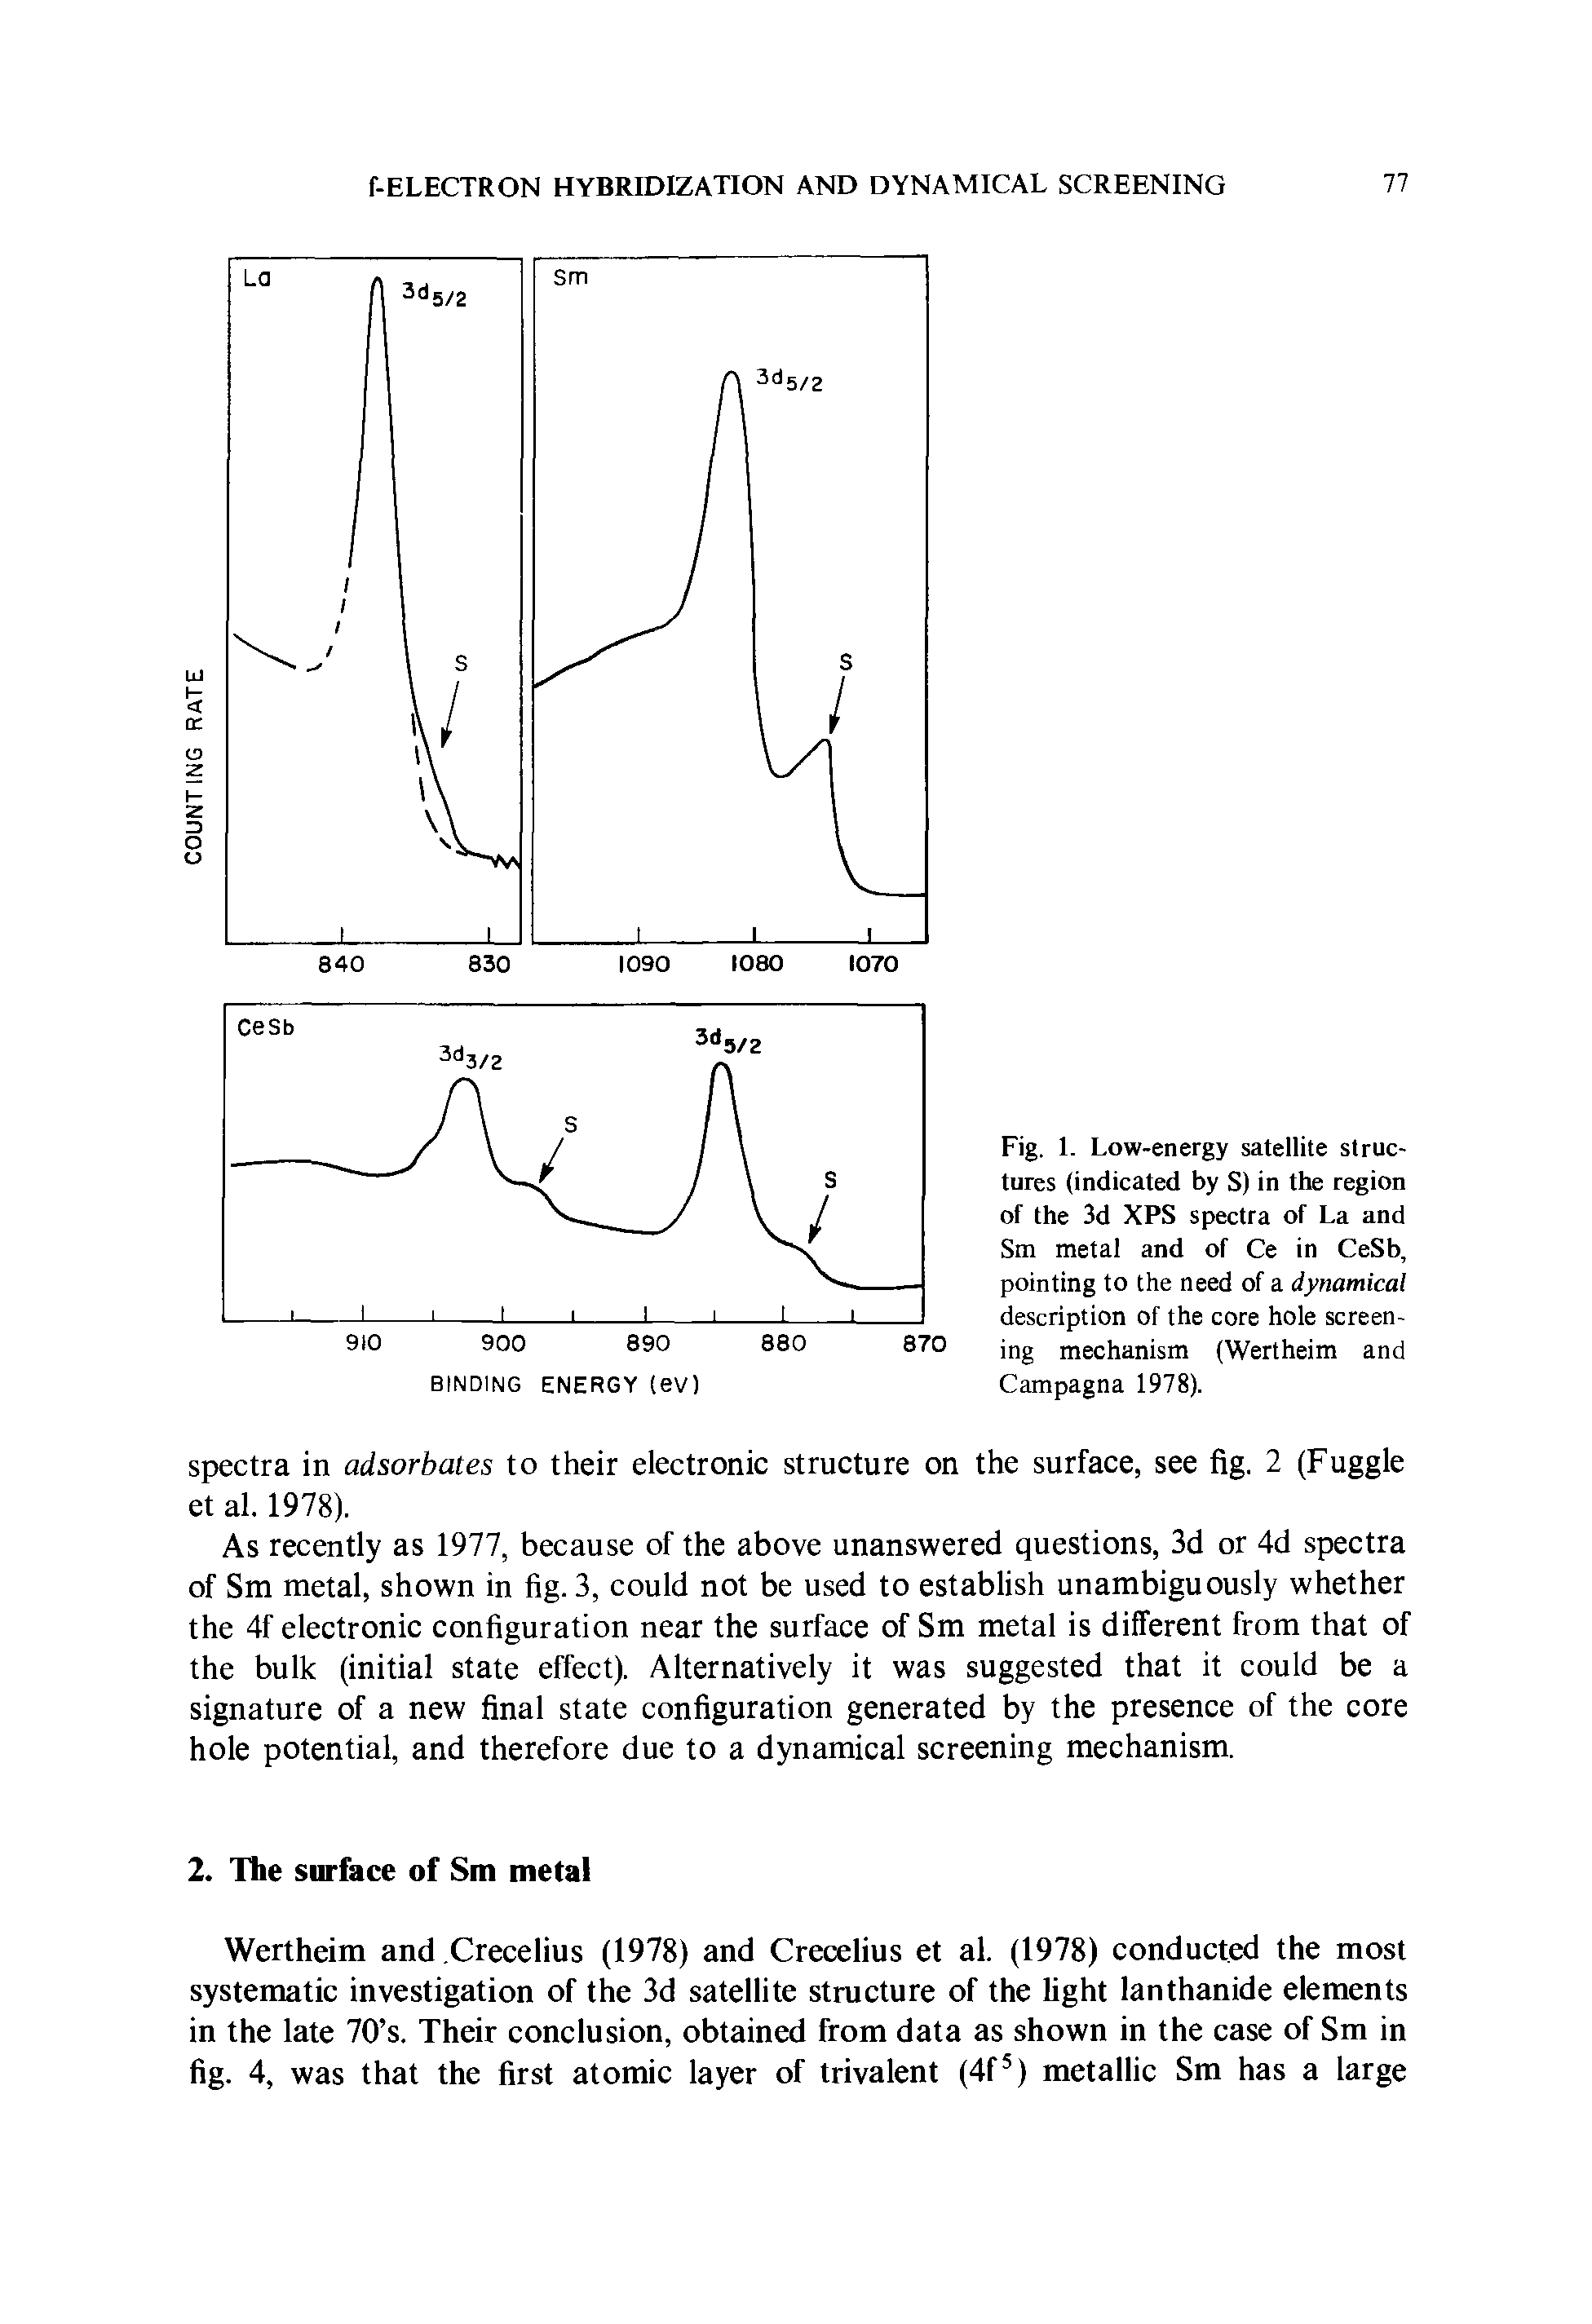 Fig. I. Low-energy satellite structures (indicated by S) in the region of the 3d XPS spectra of La and Sm metal and of Ce in CeSb, pointing to the need of a dynamical description of the core hole screening mechanism (Wertheim and Campagna 1978).